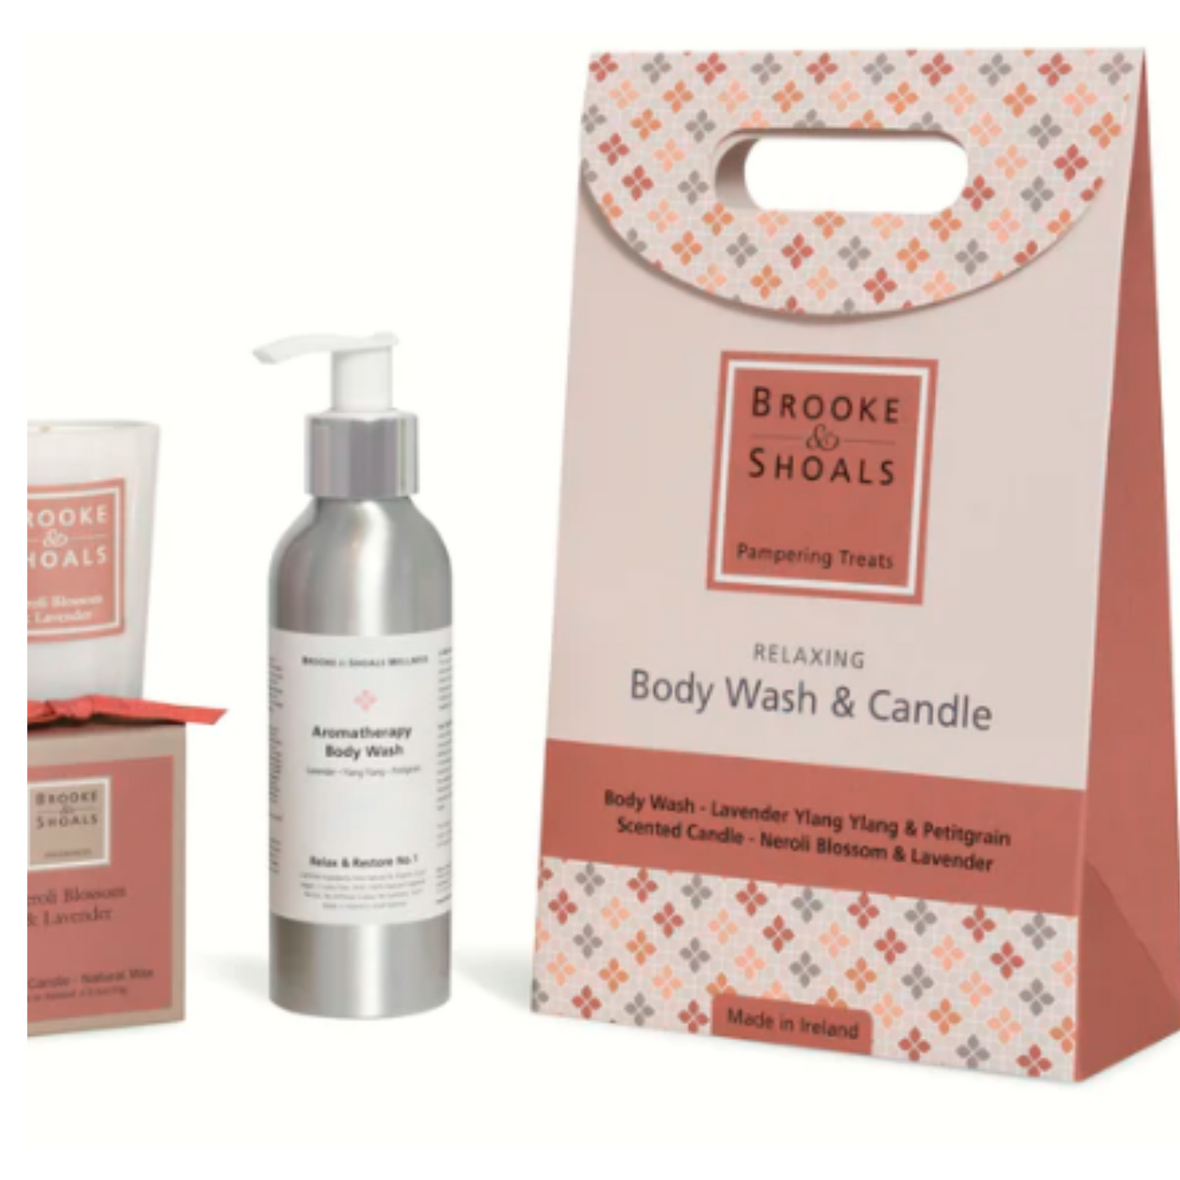 Brook & Shoals Relaxing Pampering Treats Set| Body Wash & Candle Set